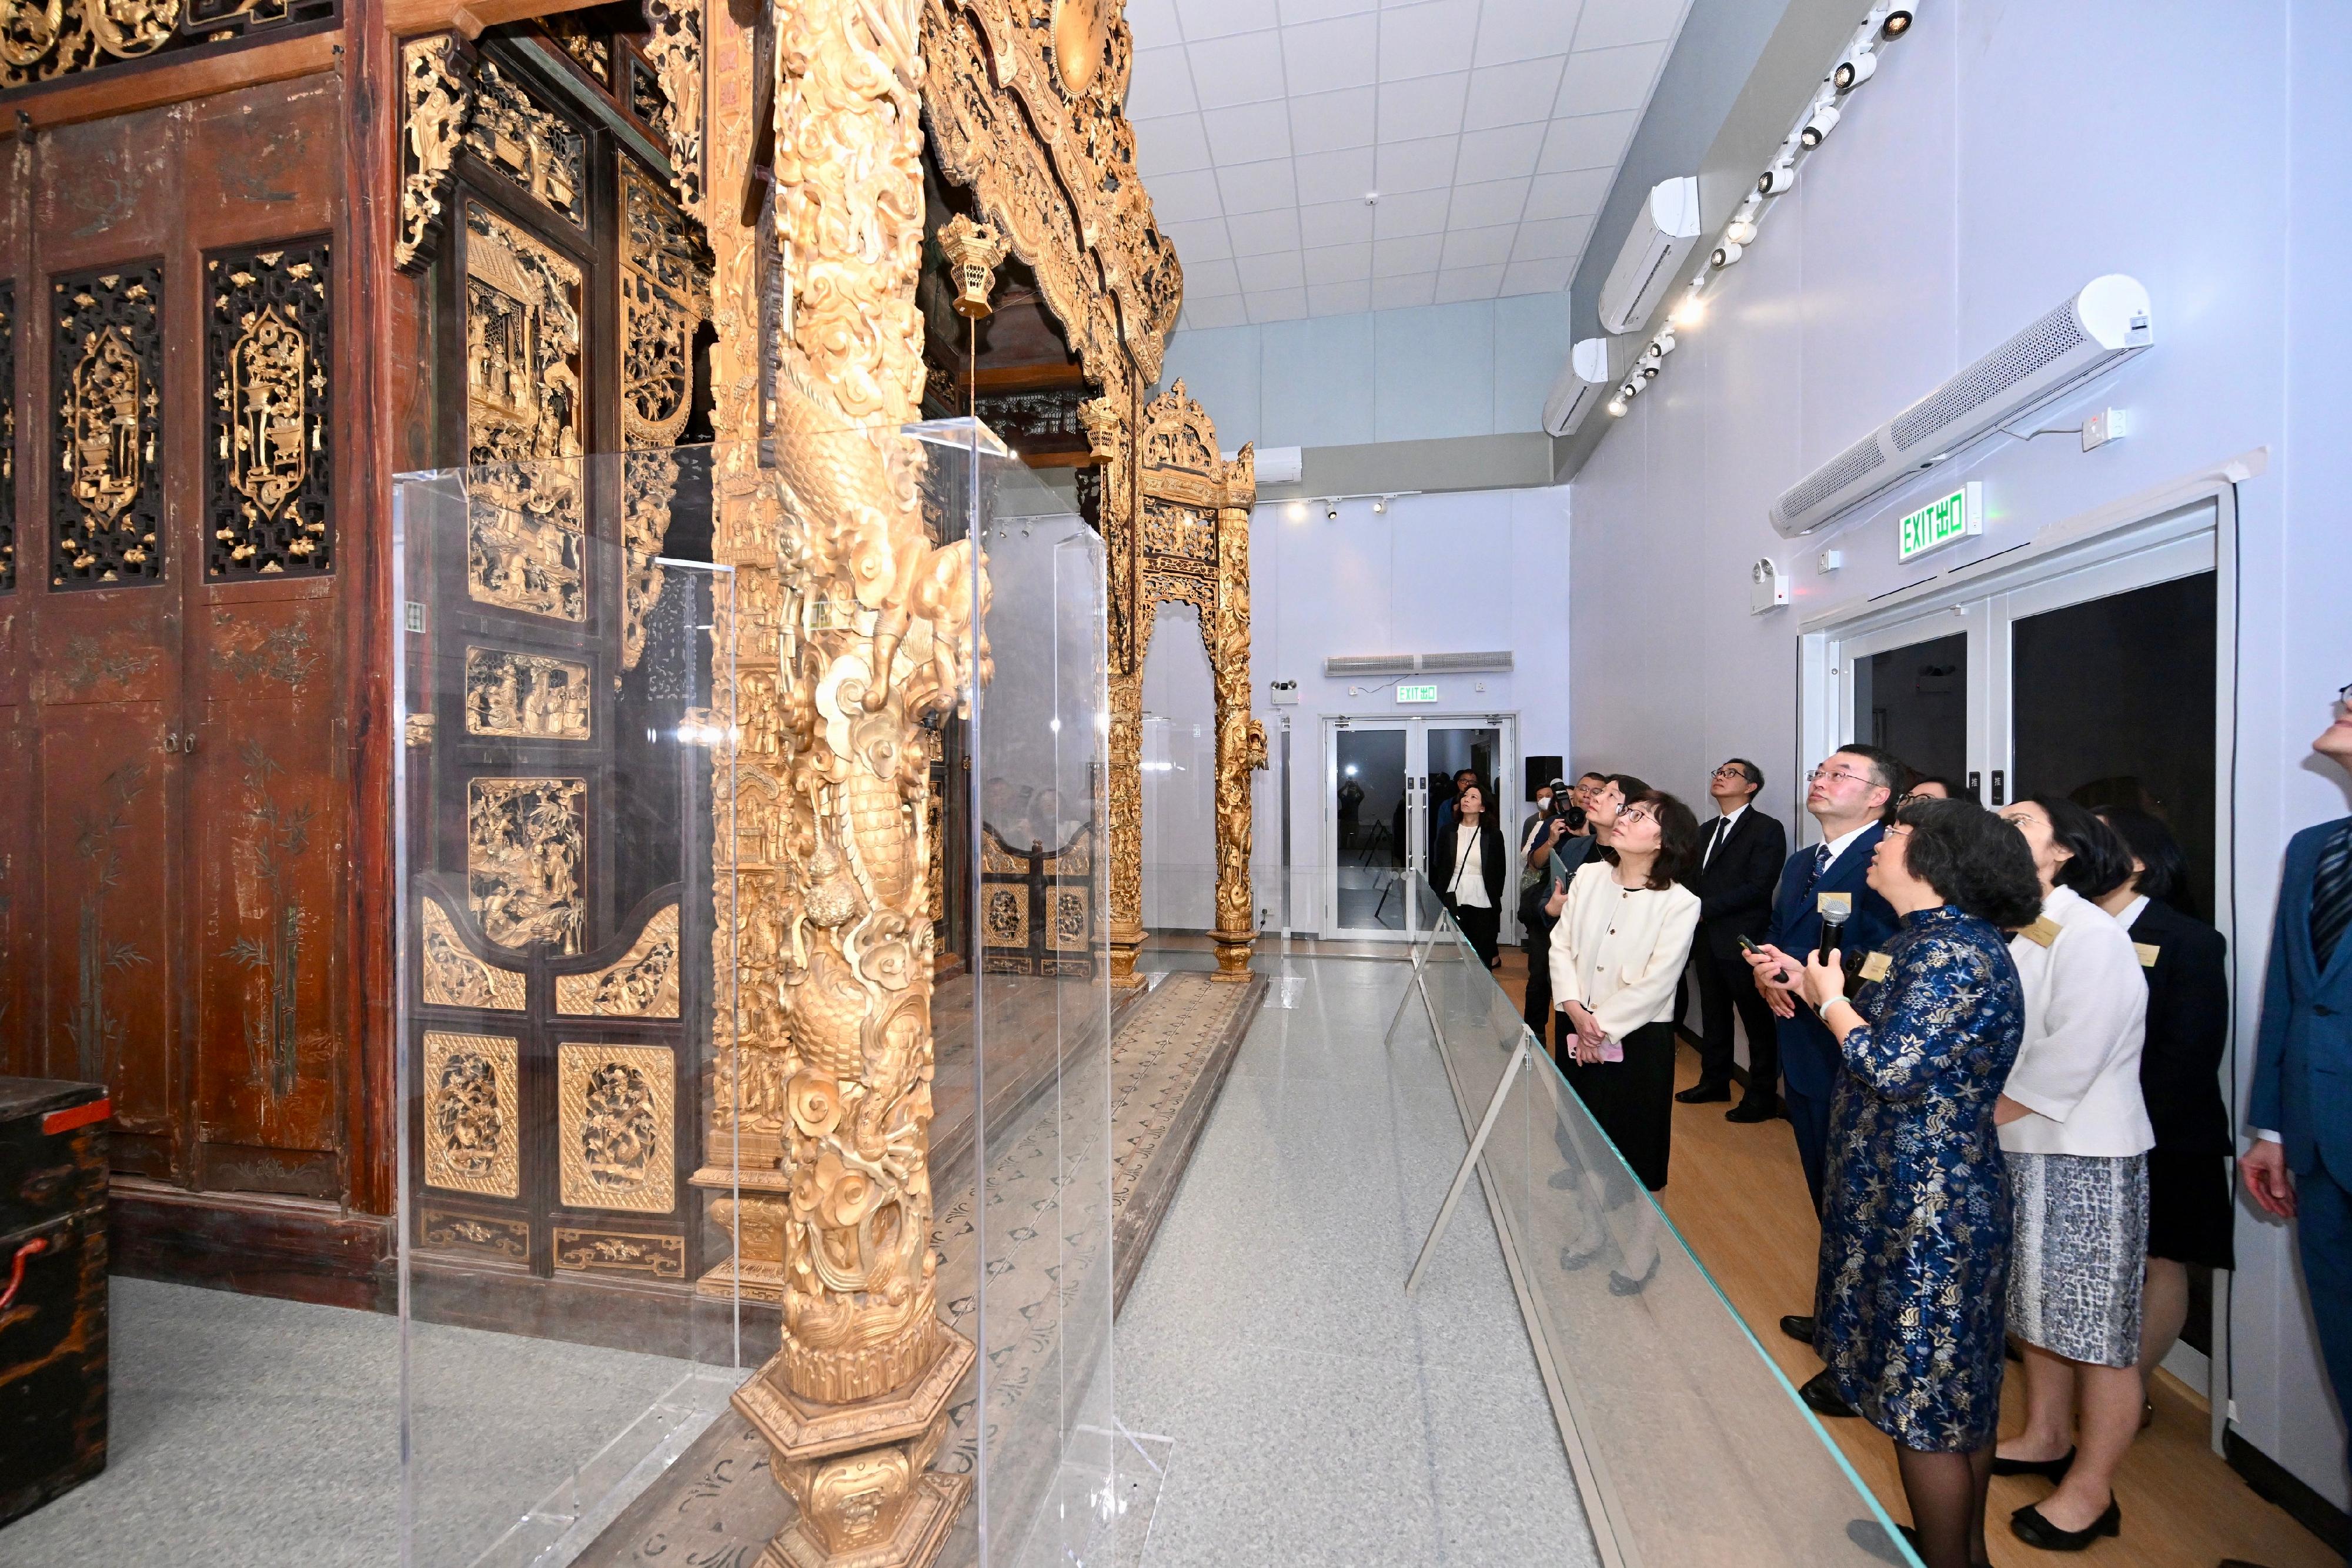 The "Under the Same Roof: Origin and Art of Lingnan Traditional Architecture" exhibition officially opened today (December 12). Photo shows the Secretary for Development, Ms Bernadette Linn (front row, second left), and the Director of Art Exhibitions China, Mr Tan Ping (front row, third left), touring the star exhibit, Panyu shrine.